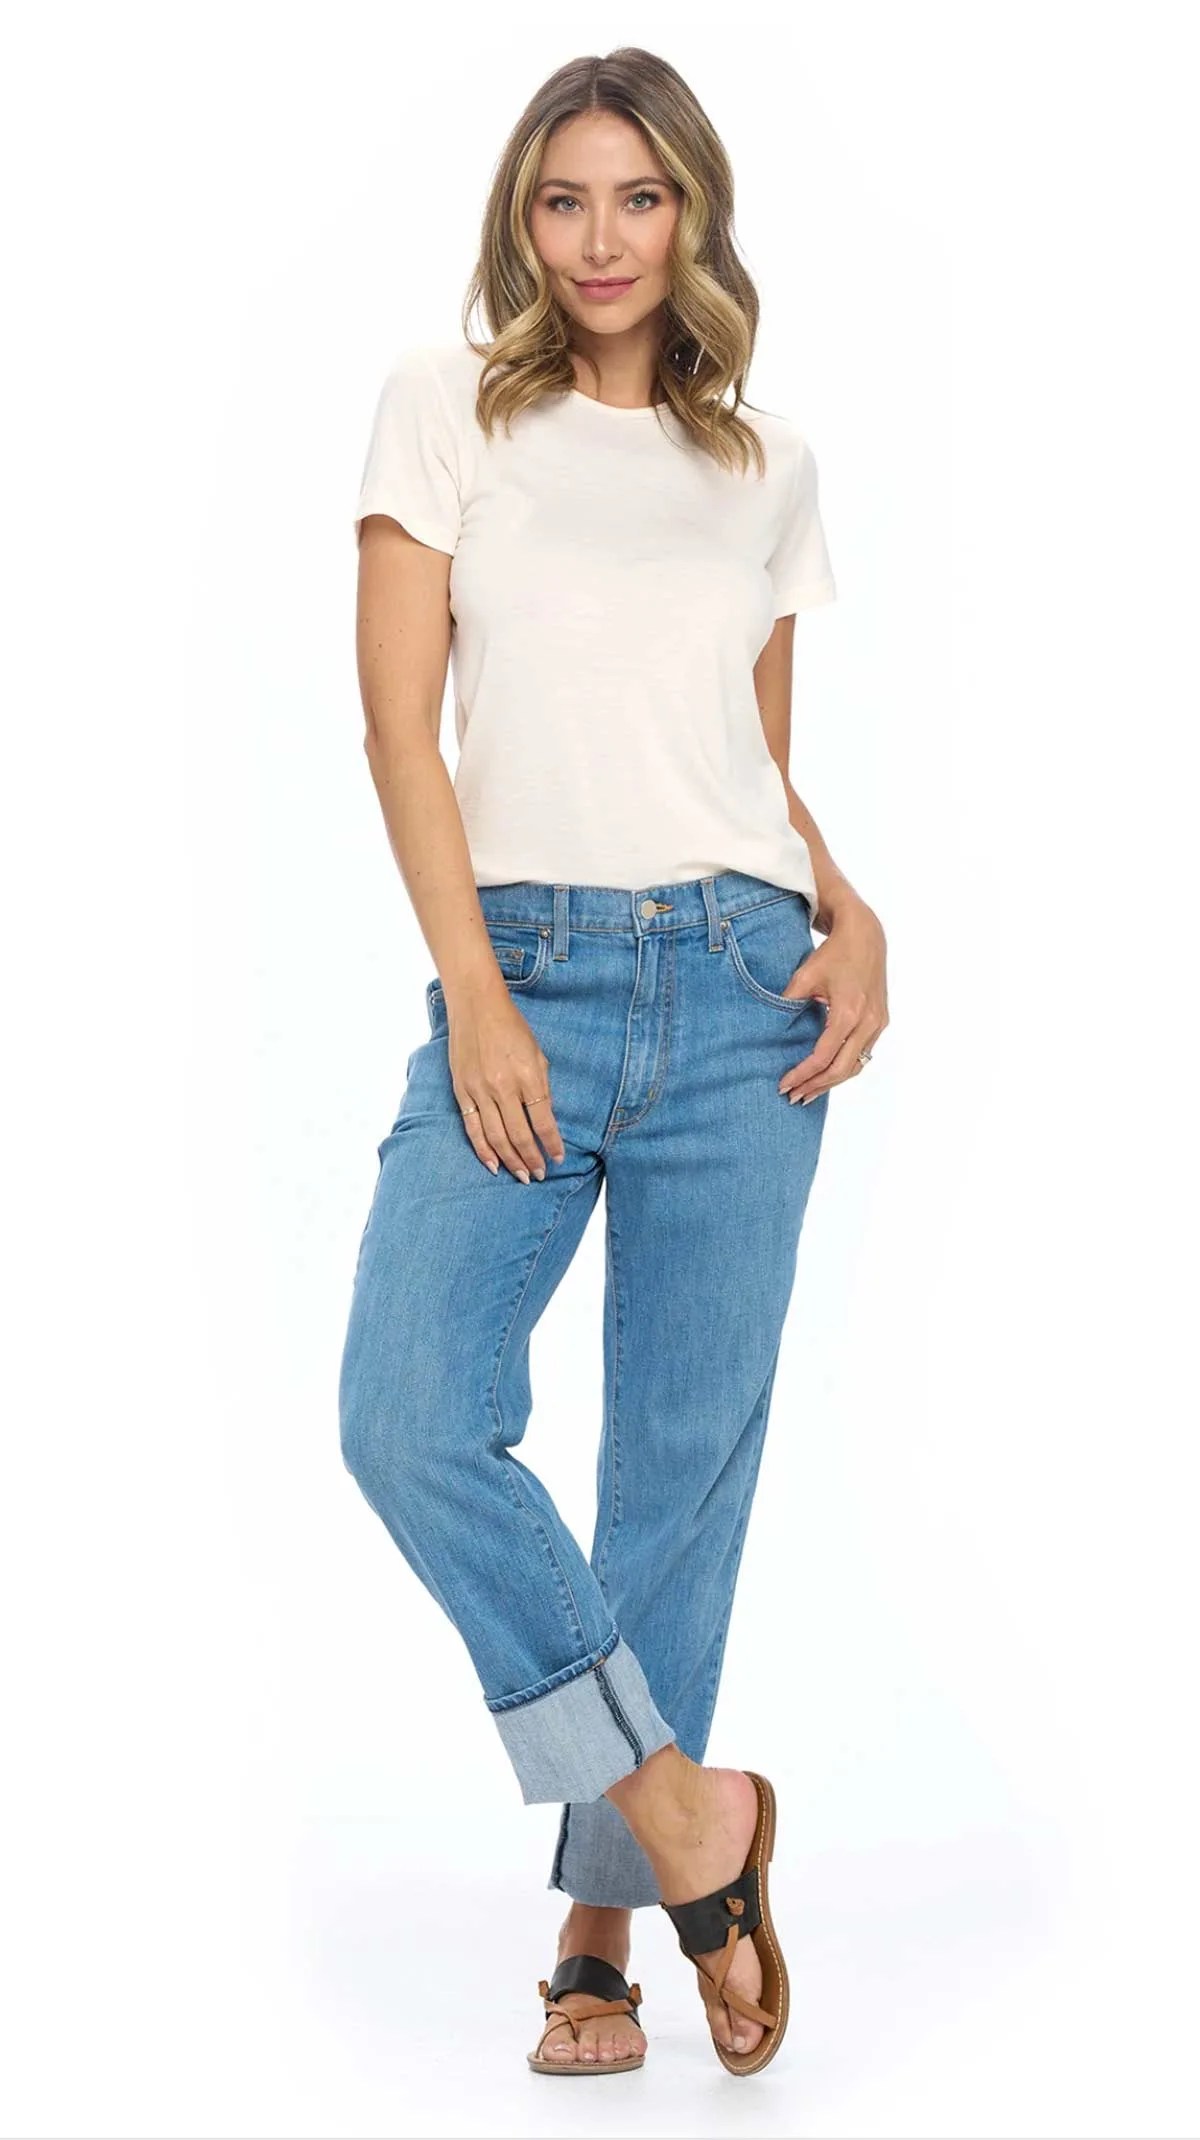 Young atttractive woman modelling a pair of travel jeans in a white T shirt and sandals. 